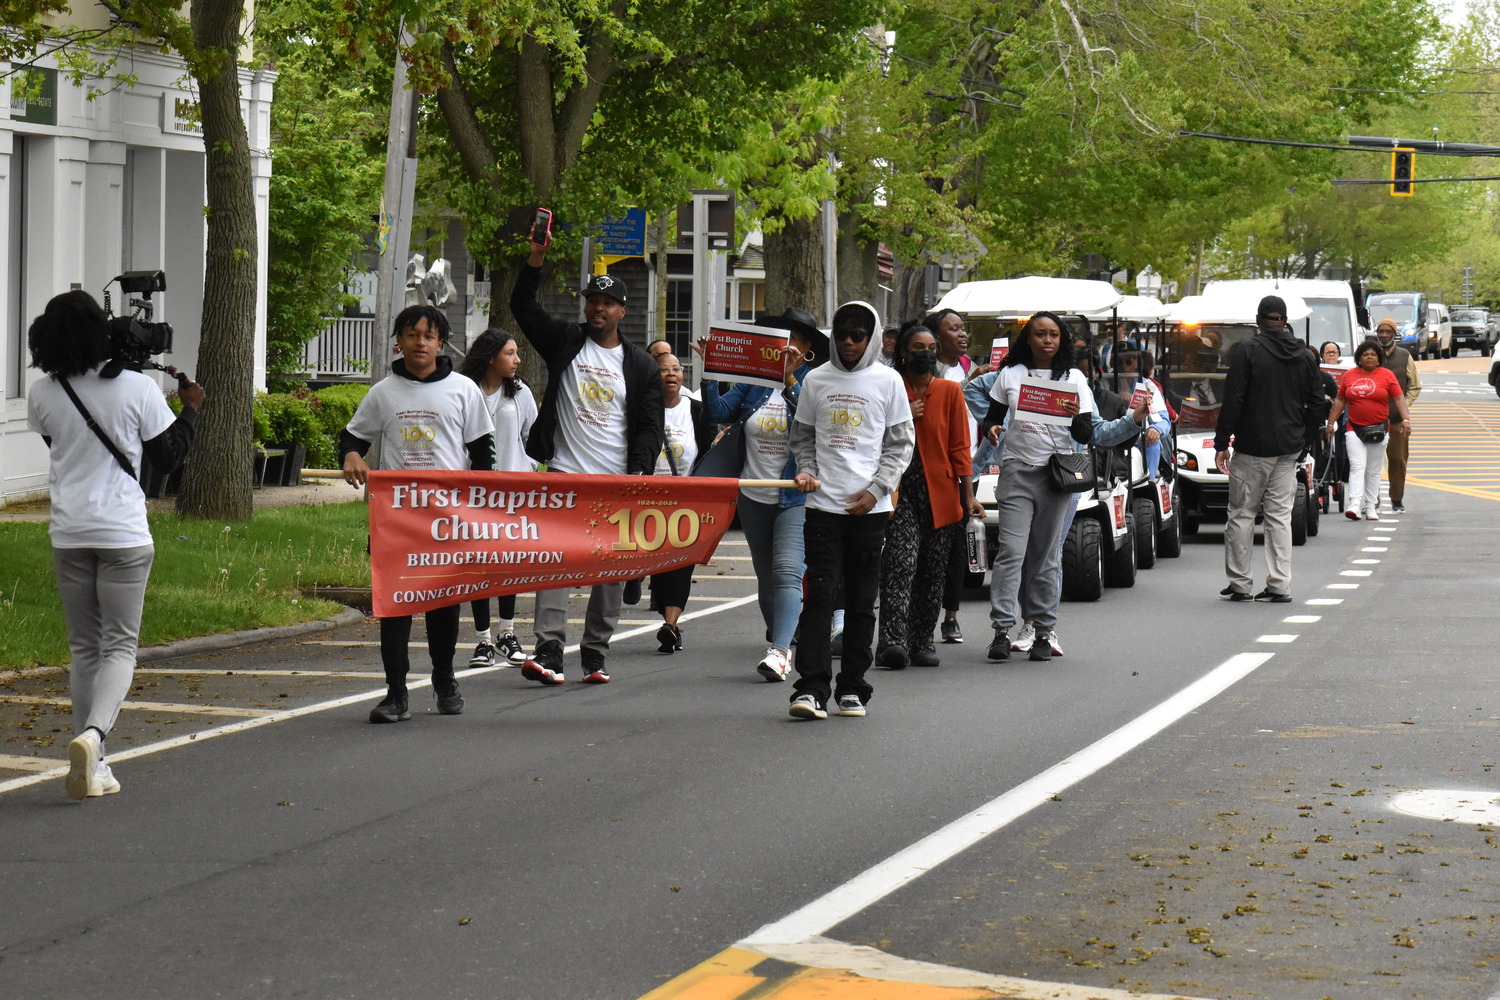 Members of the First Baptist Church of Bridgehampton marched on Montauk Highway on Sunday from their original home on Corwith Avenue to their current church on the Bridghampton-Sag Harbor Turnpike to celebrate the congregation's centennial. STEPHEN J. KOTZ